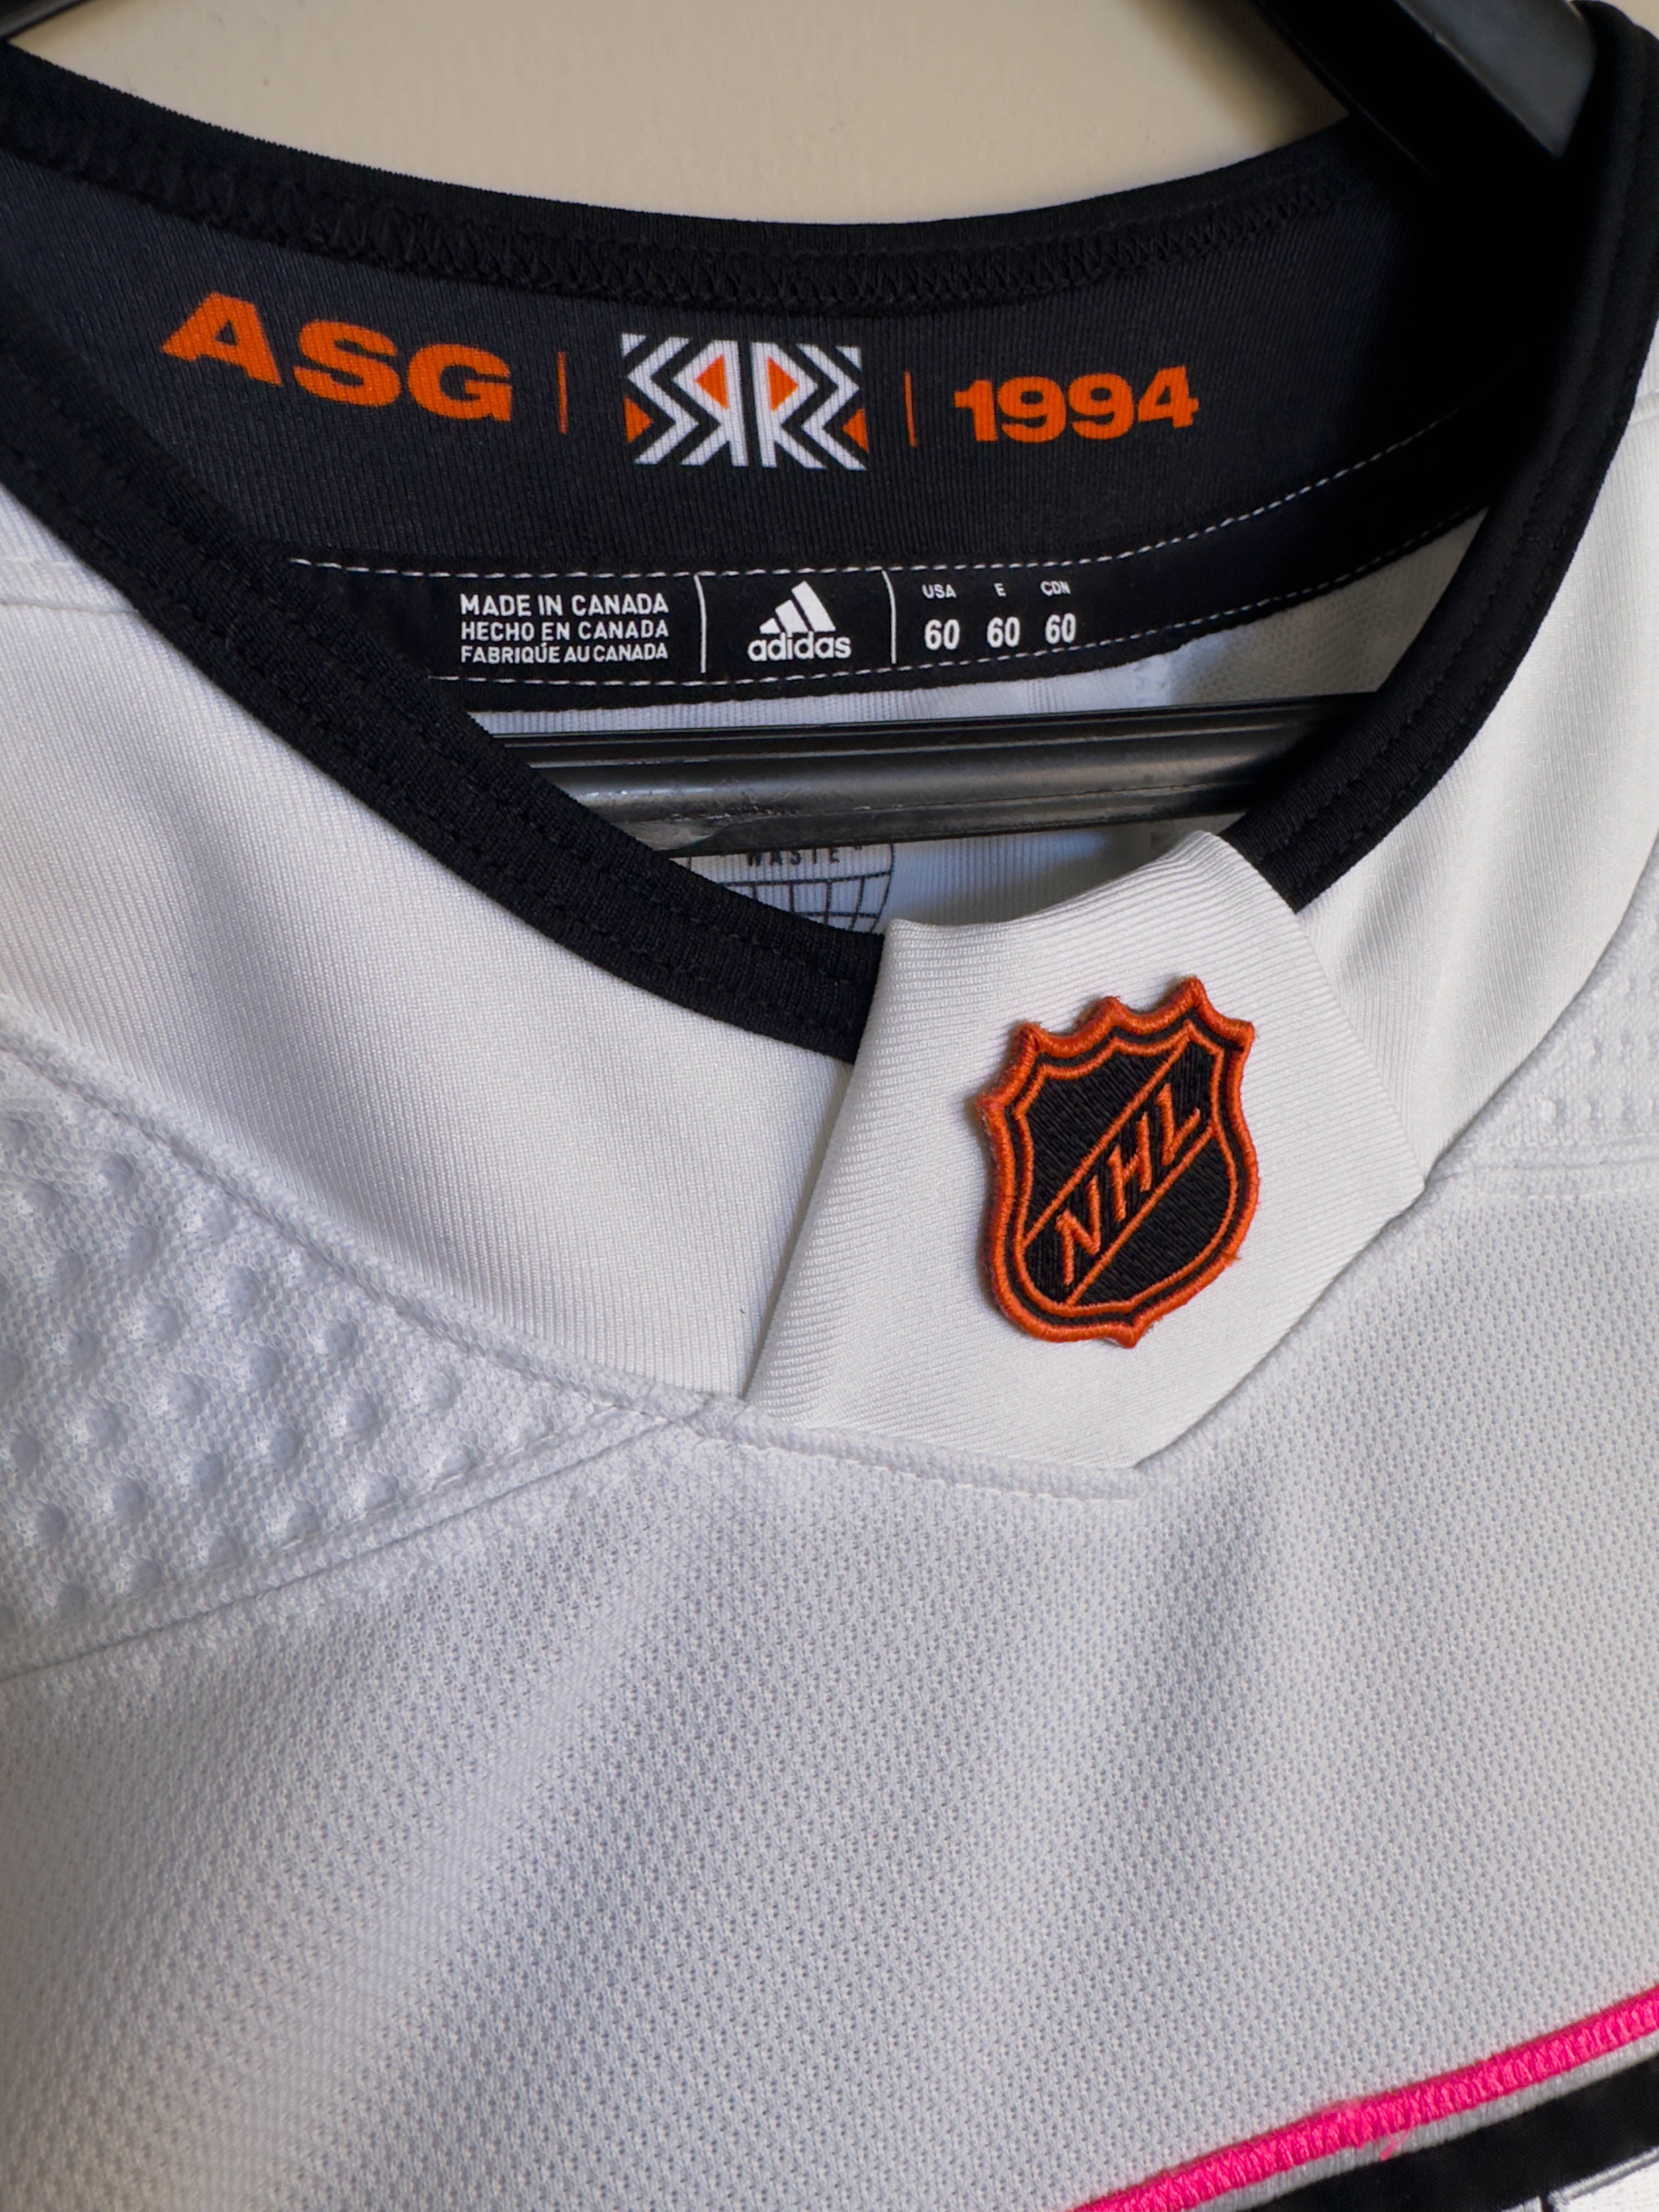 Adidas Authentic 2022 NHL All Star Jersey - Eastern Conference - Adult